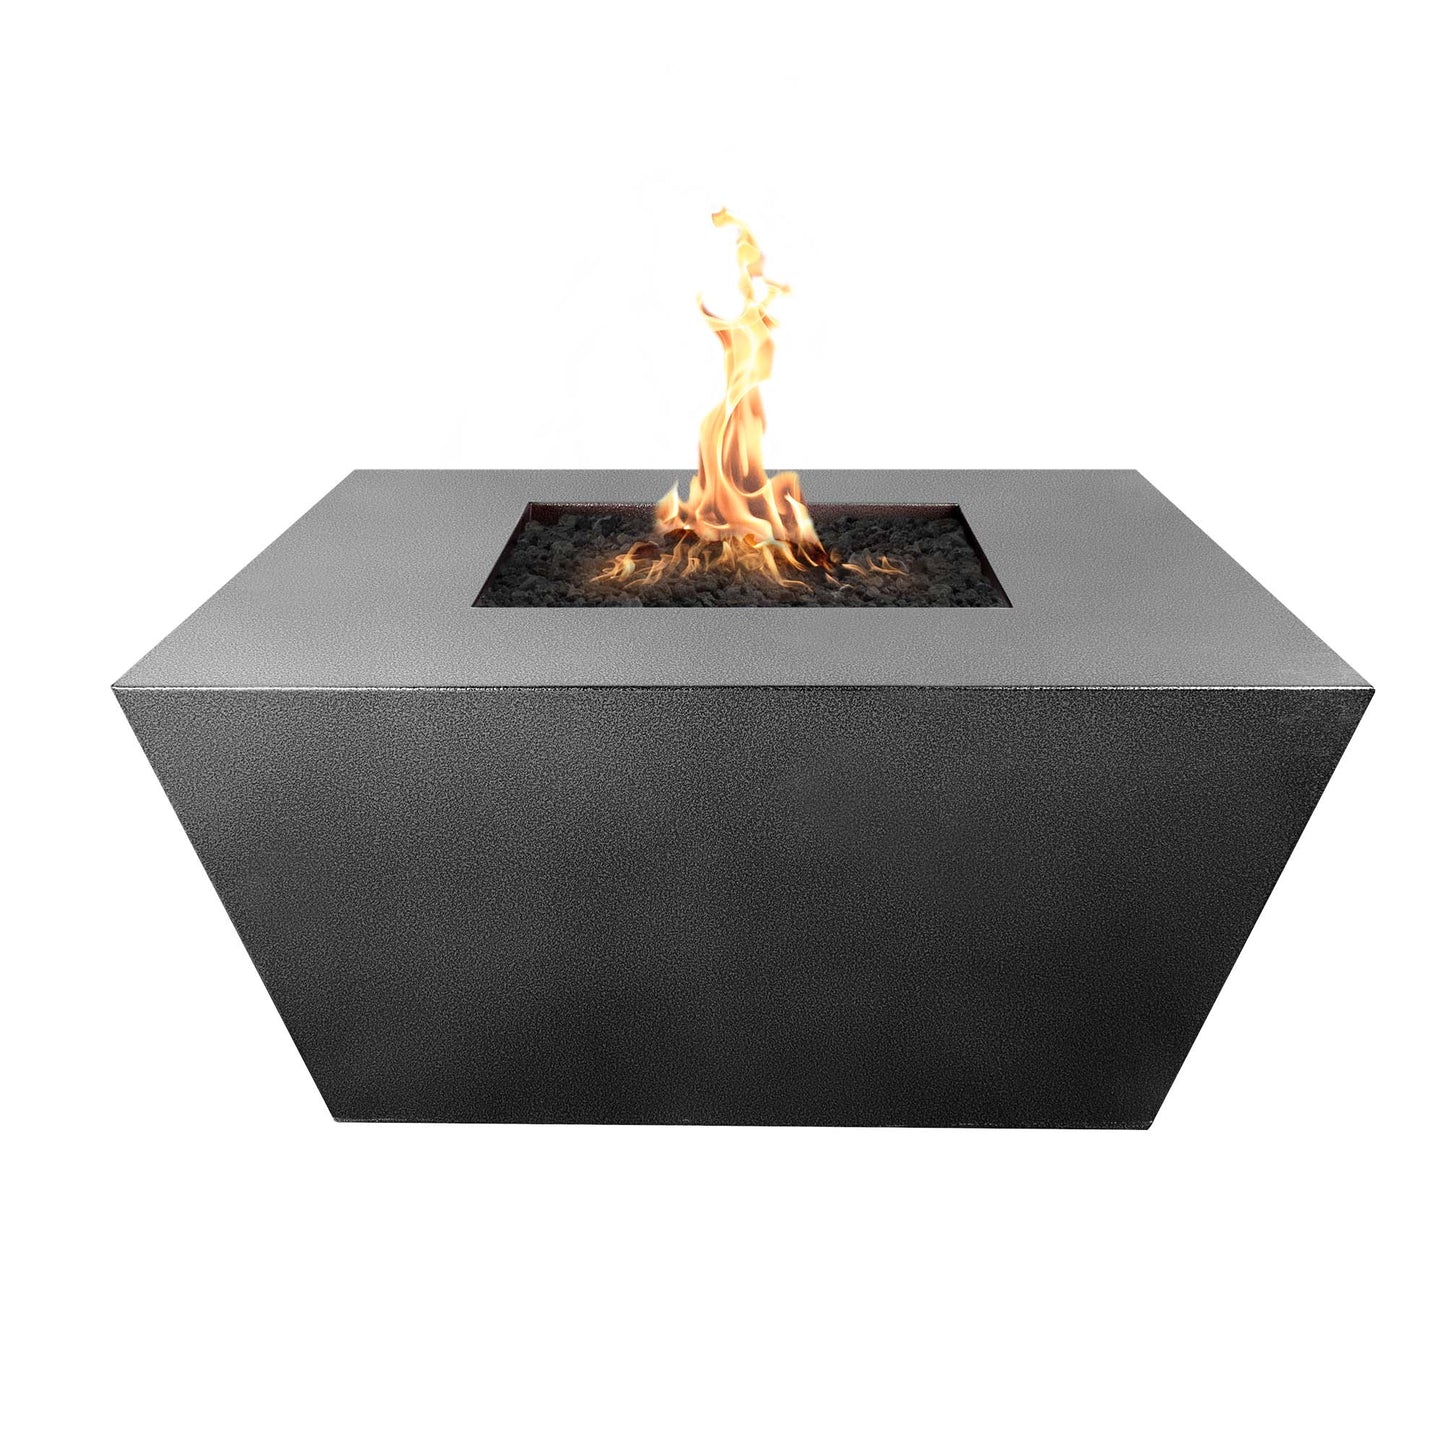 The Outdoor Plus Square Redan 36" Corten Steel Liquid Propane Fire Pit with 110V Electronic Ignition